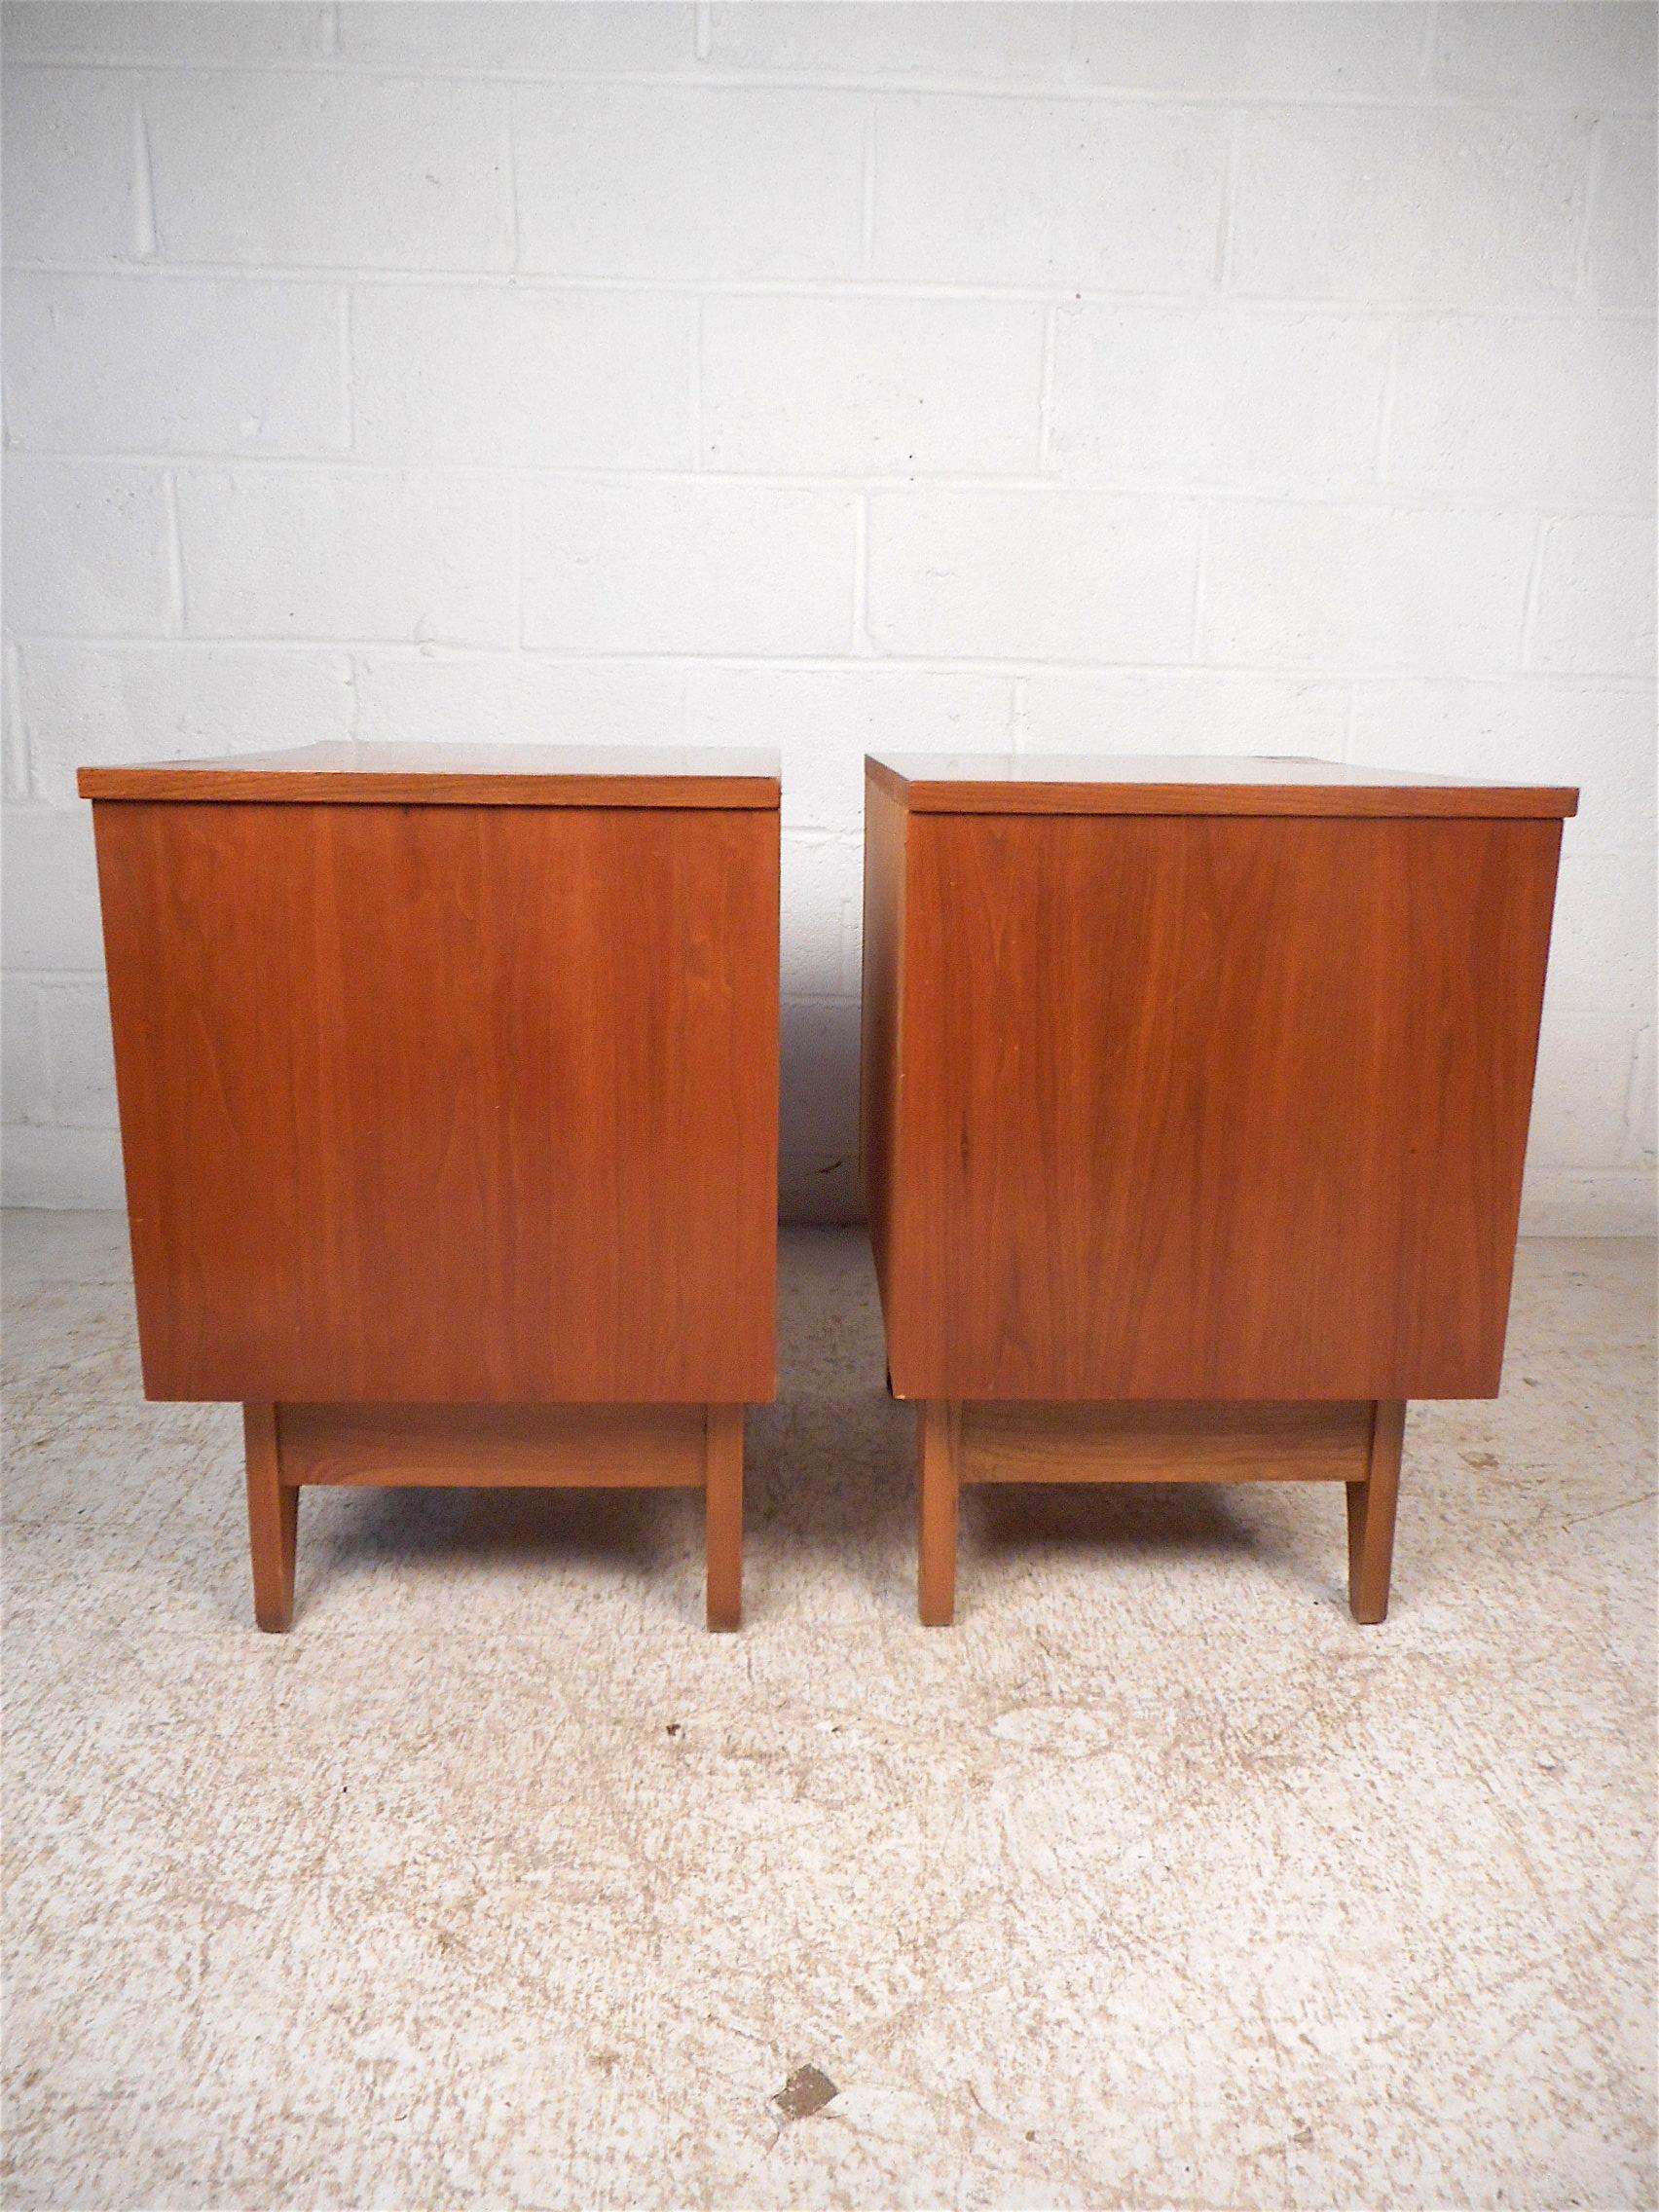 Midcentury Curved Front Nightstands, a Pair 1